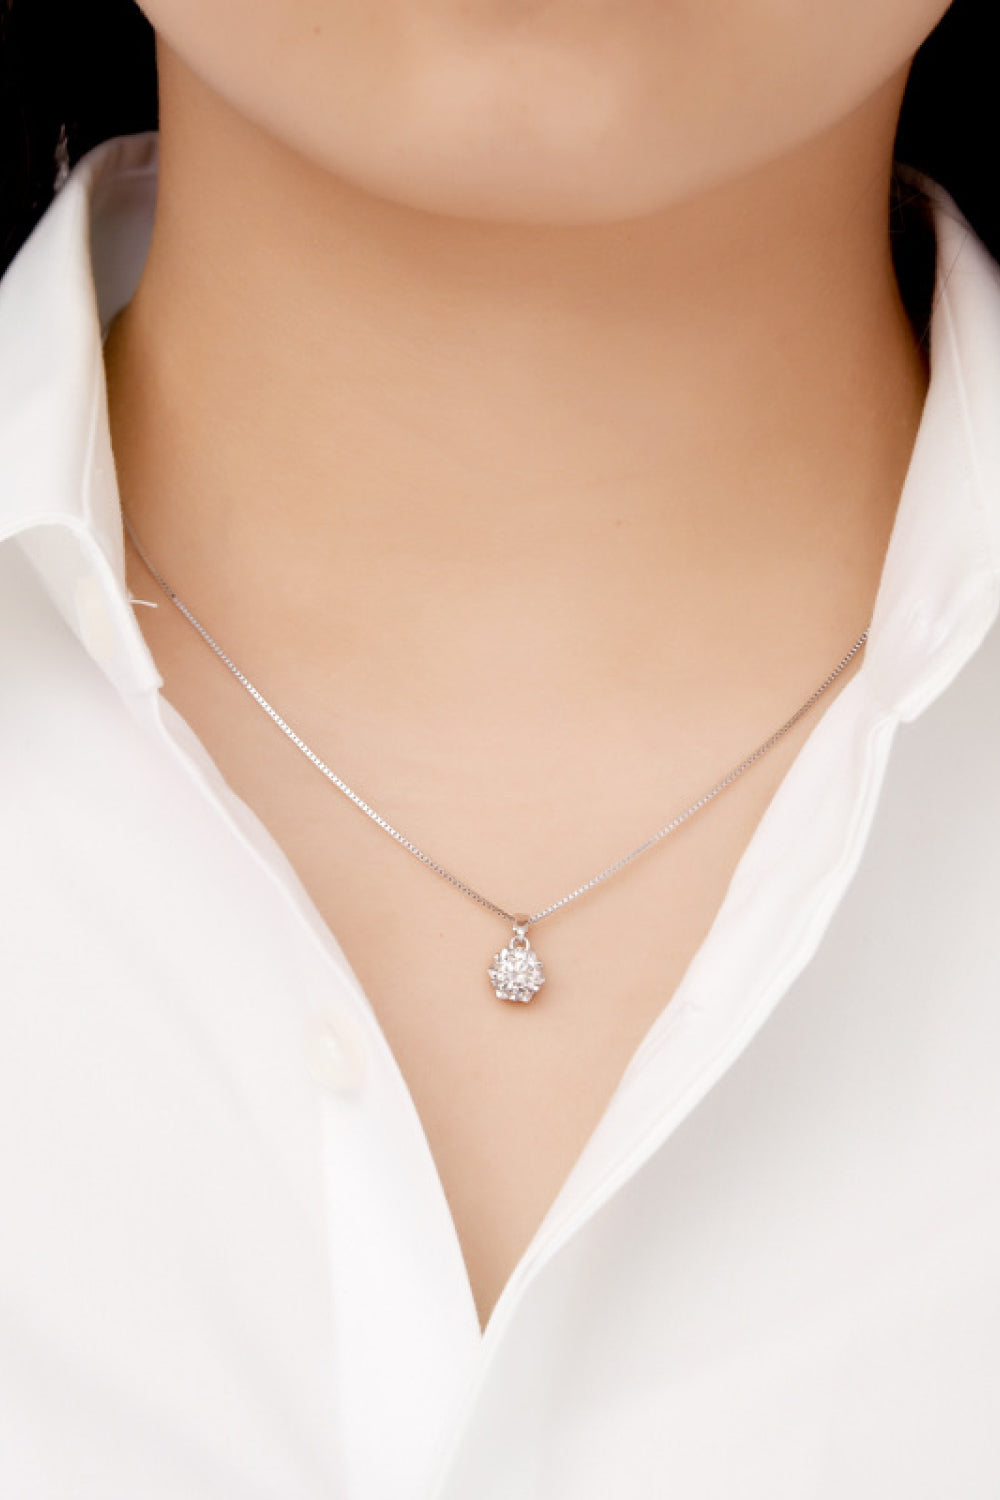 1 Carat Moissanite Pendant Platinum-Plated Necklace Print on any thing USA/STOD clothes